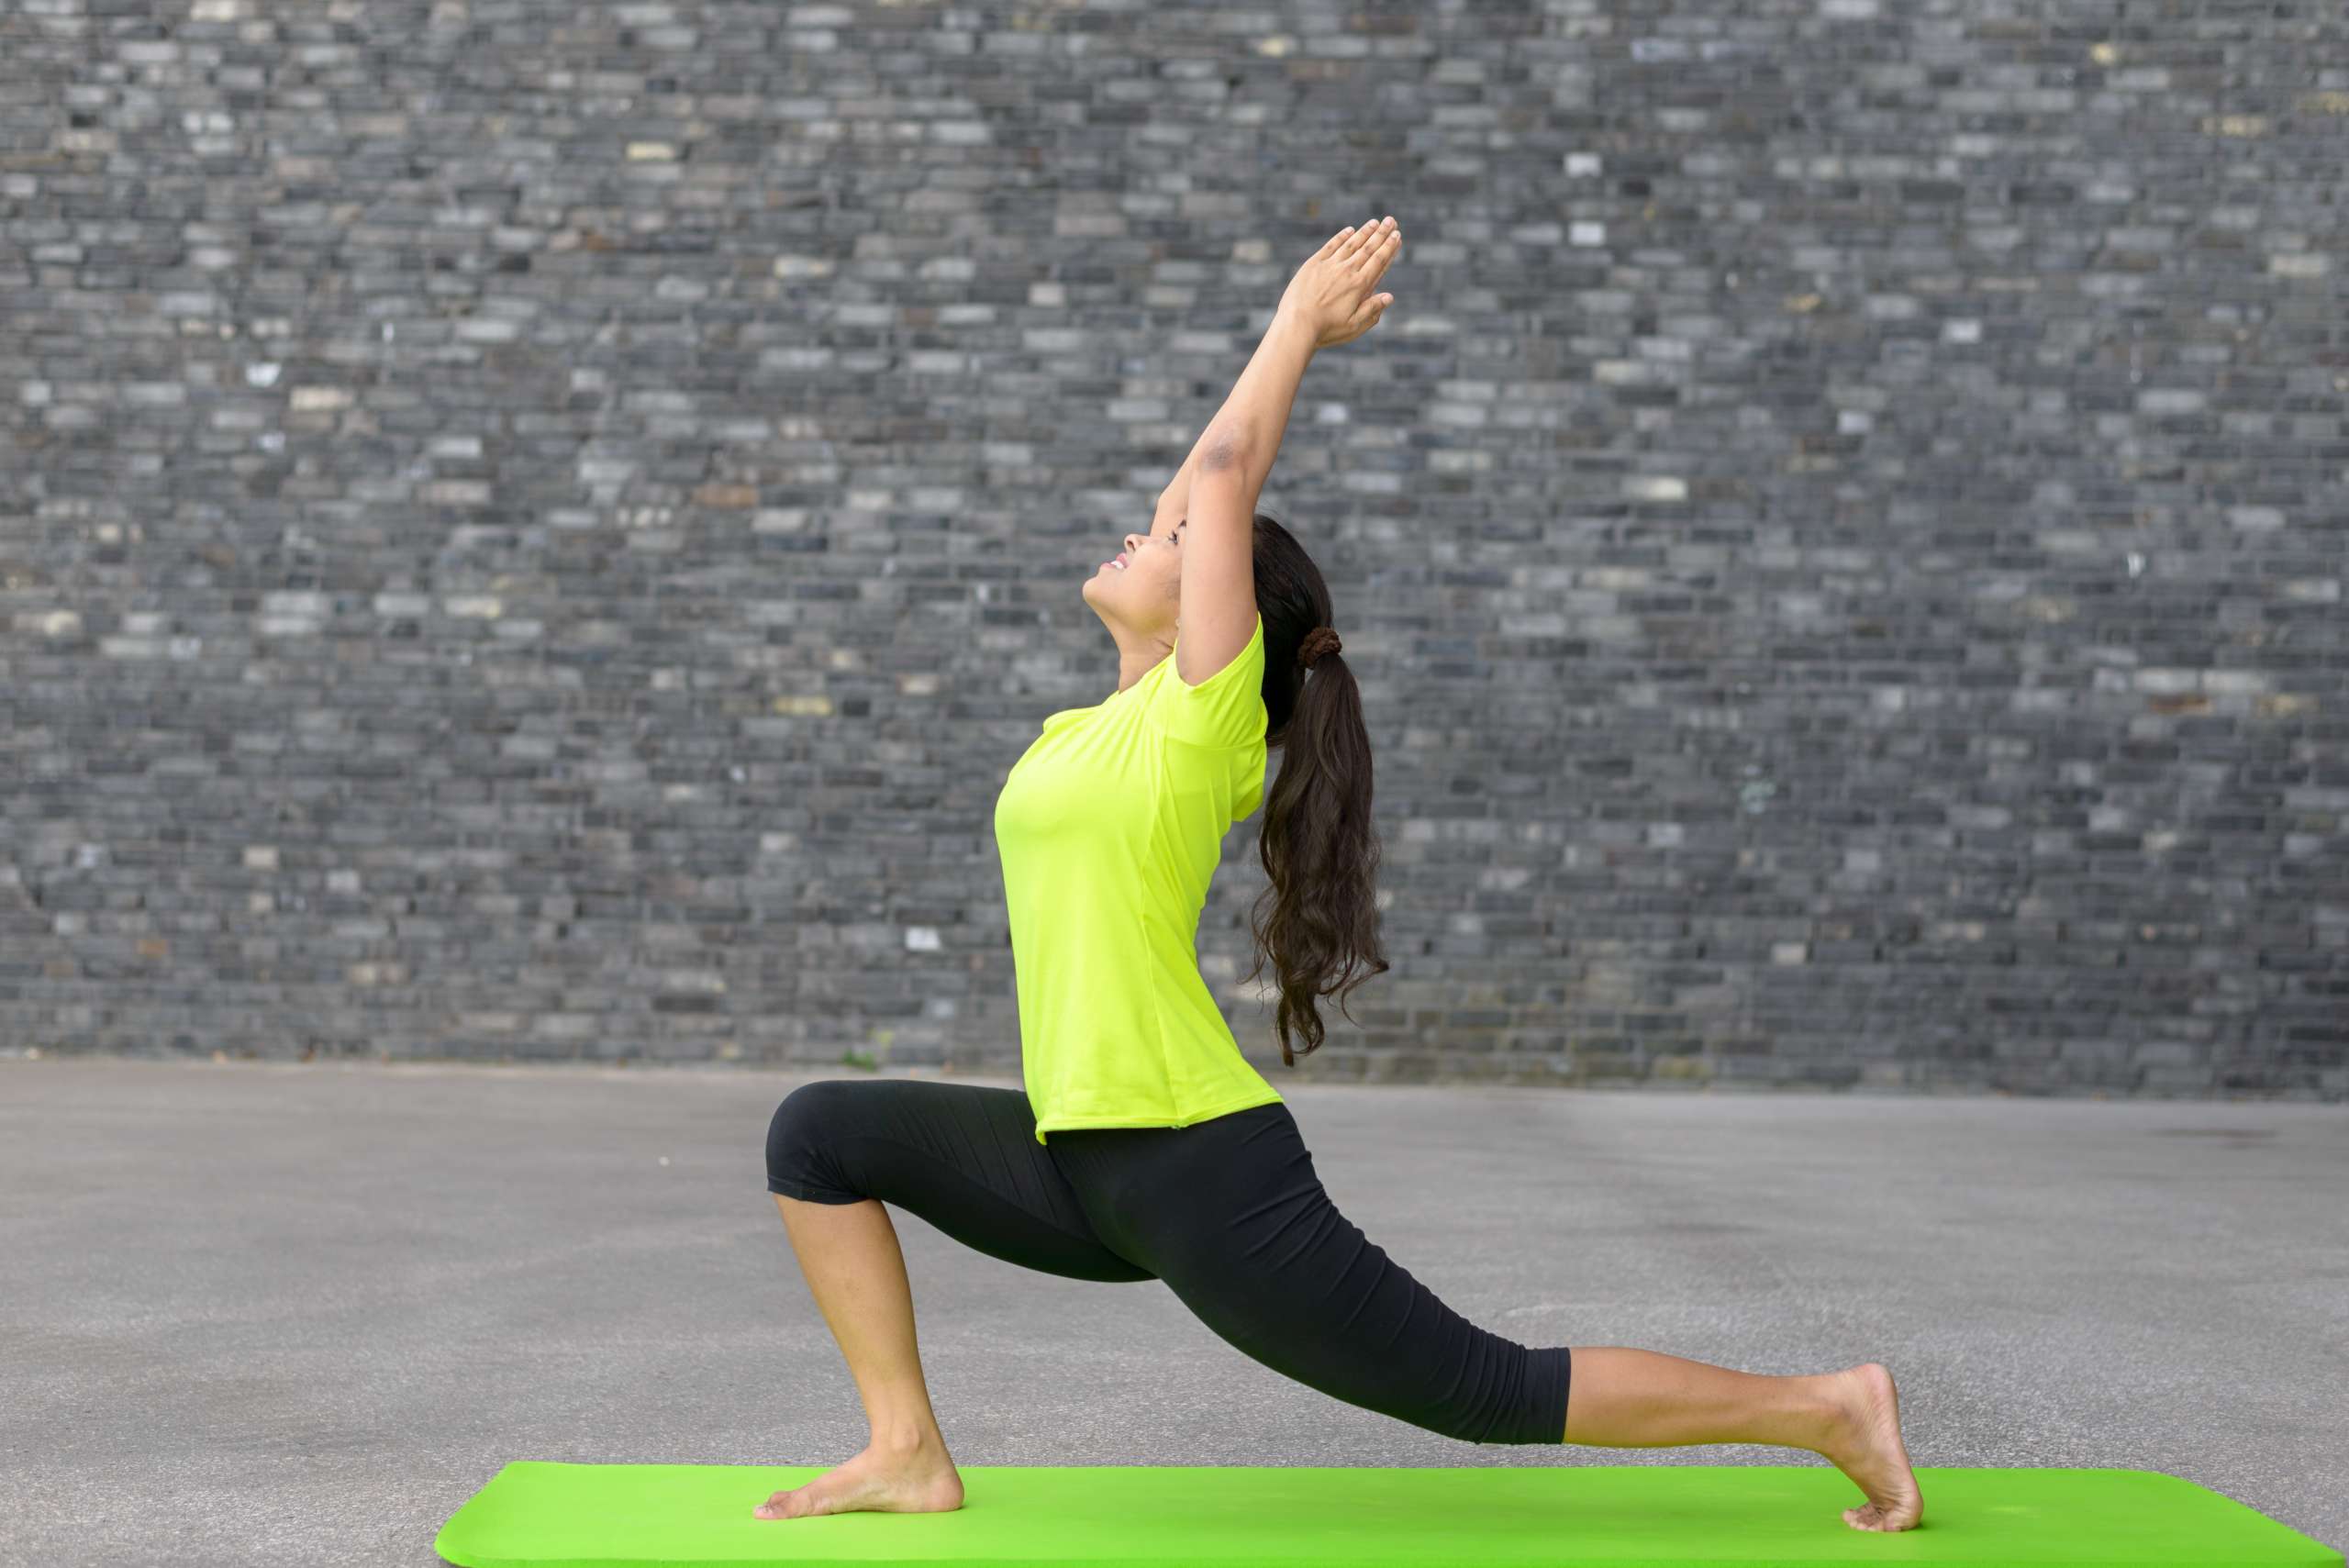 Fit athletic young woman doing yoga exercises- Pelvic Health Before Conception